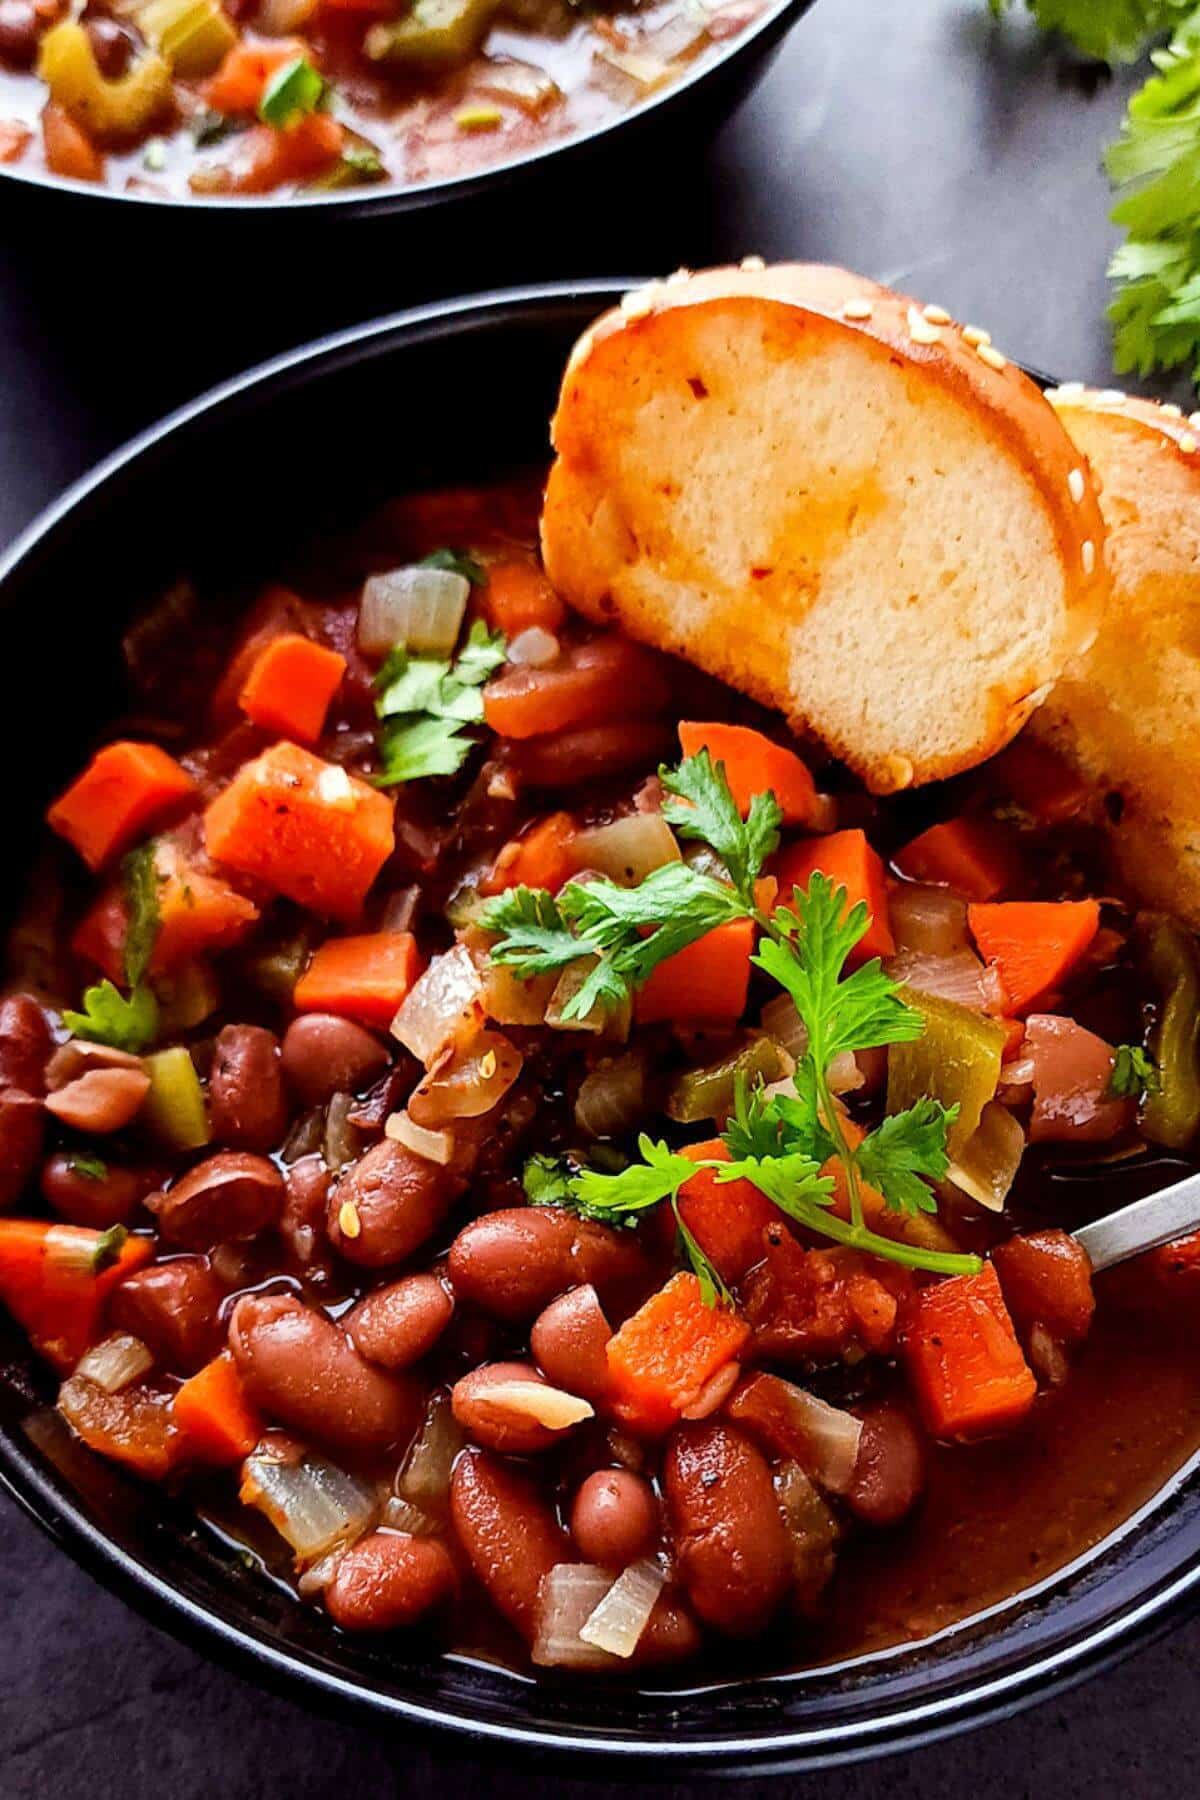 Kidney bean stew in a black bowl with toasted bread slices.